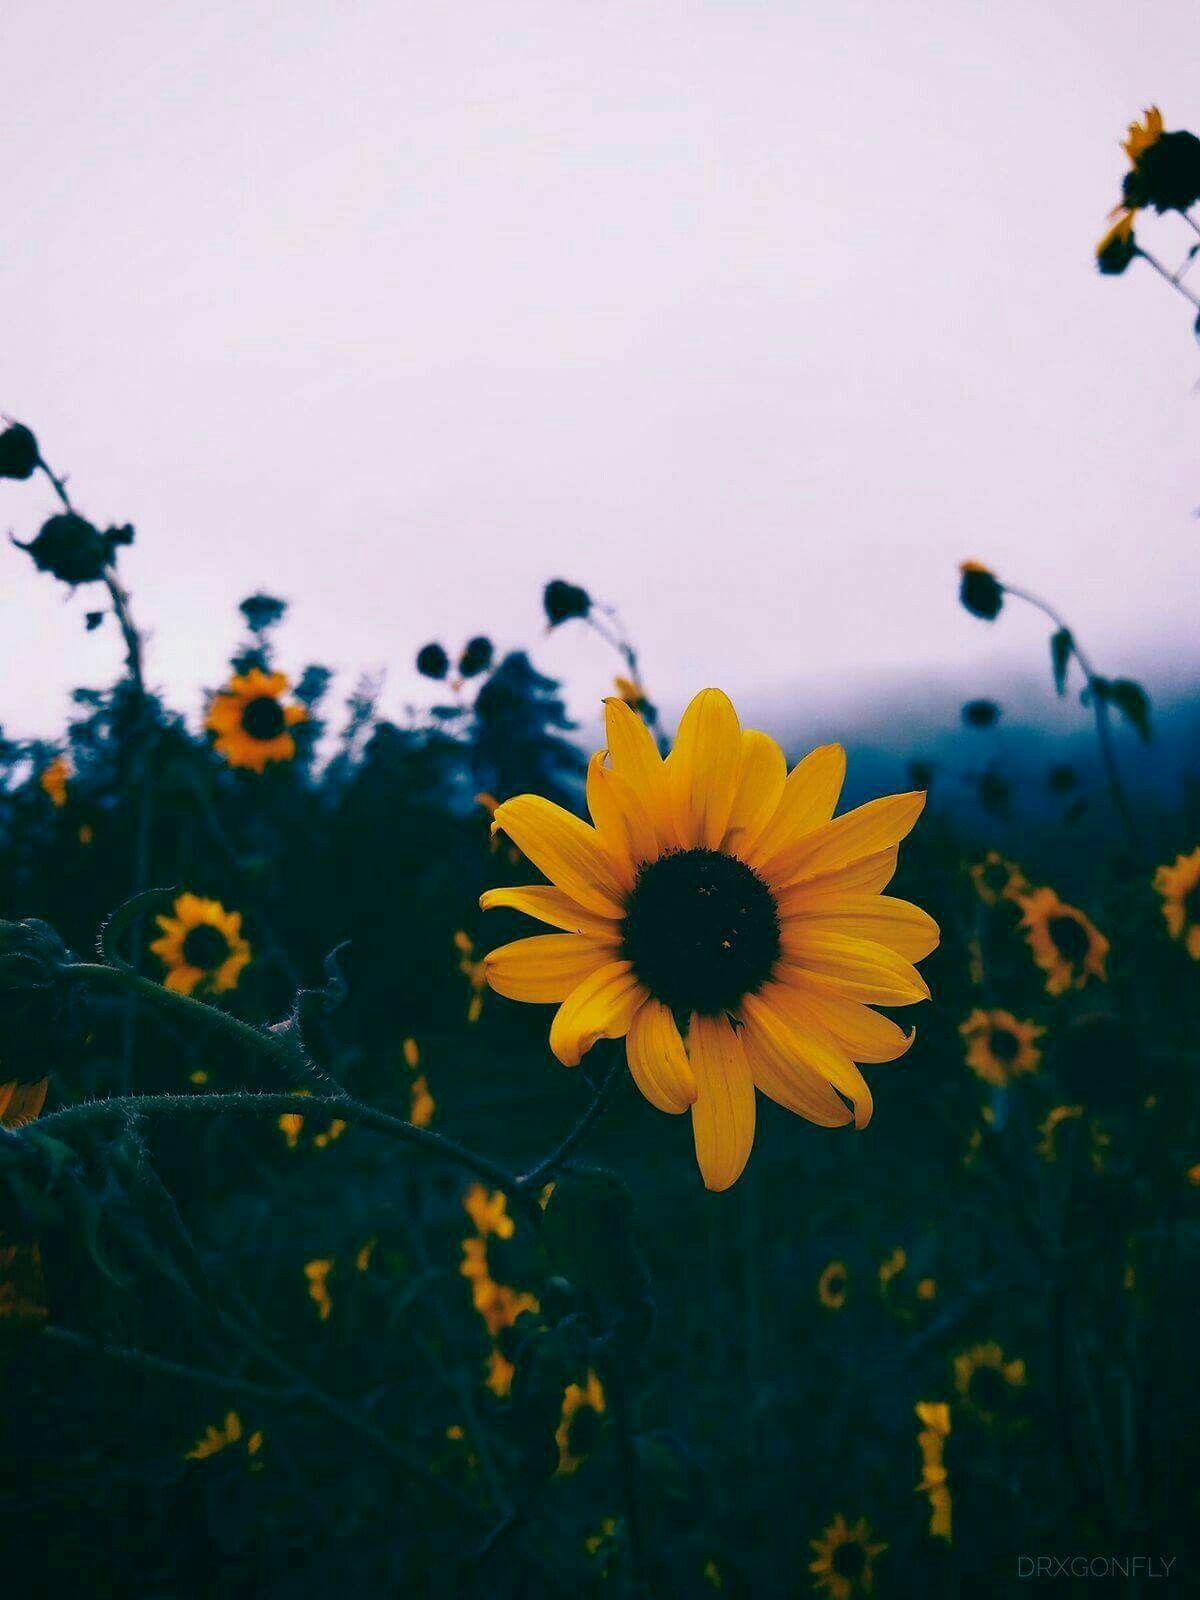 Sunflower Aesthetic Wallpapers - Top ...